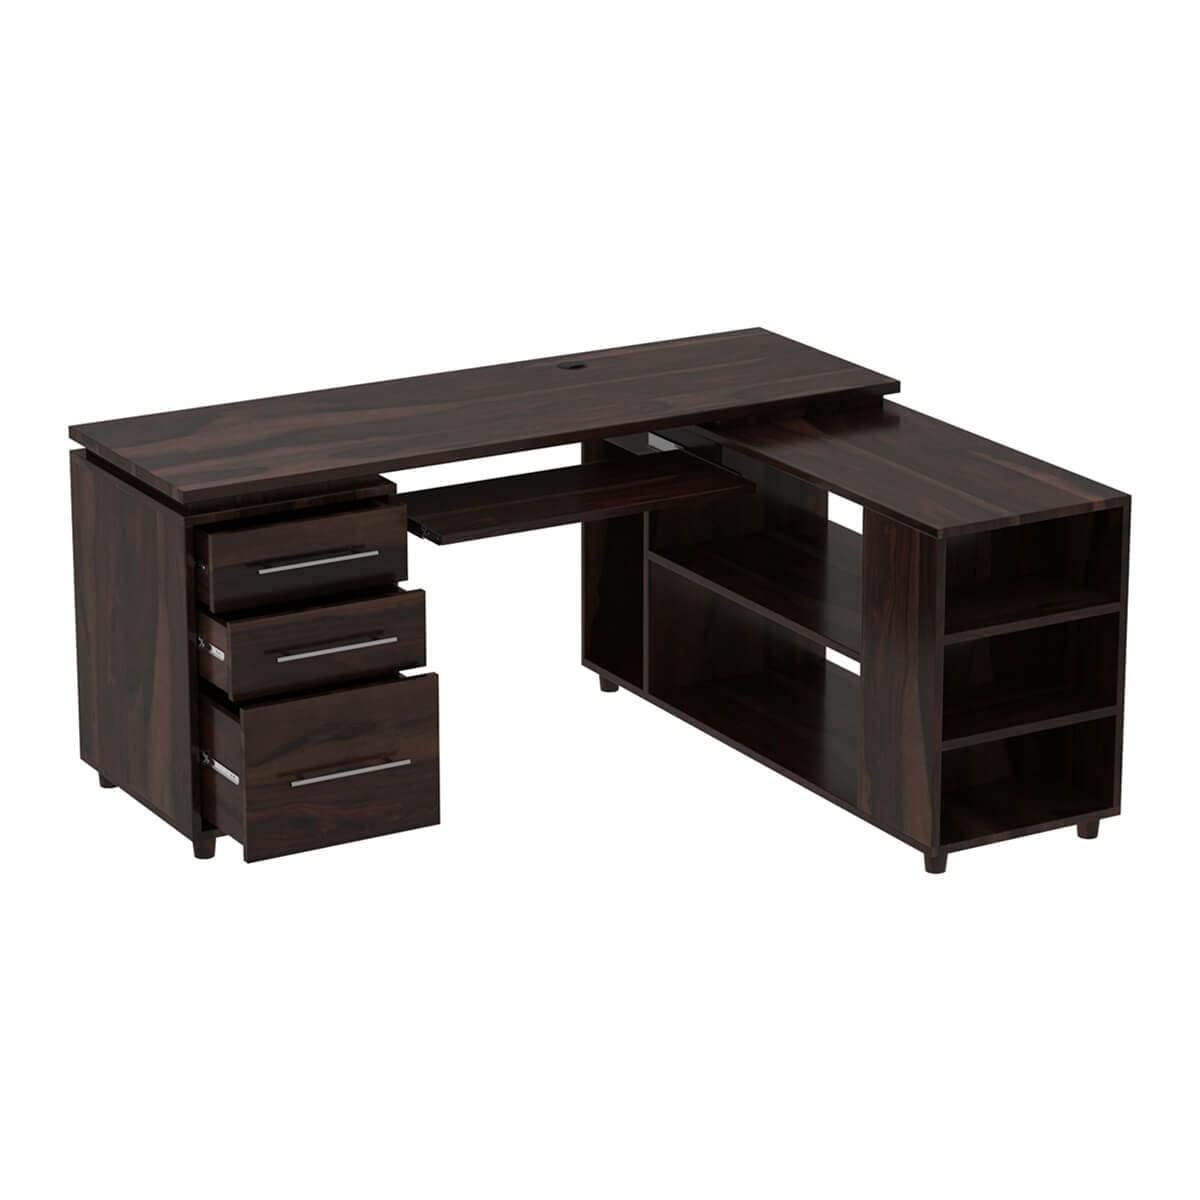 WoodMarwar Solid Sheesham Wood Office Table for Office Work | Wooden Study Table | Table with 3 Drawers, Keyboard Tray & Attached Storage Cabinet for Home, Office & Study Room